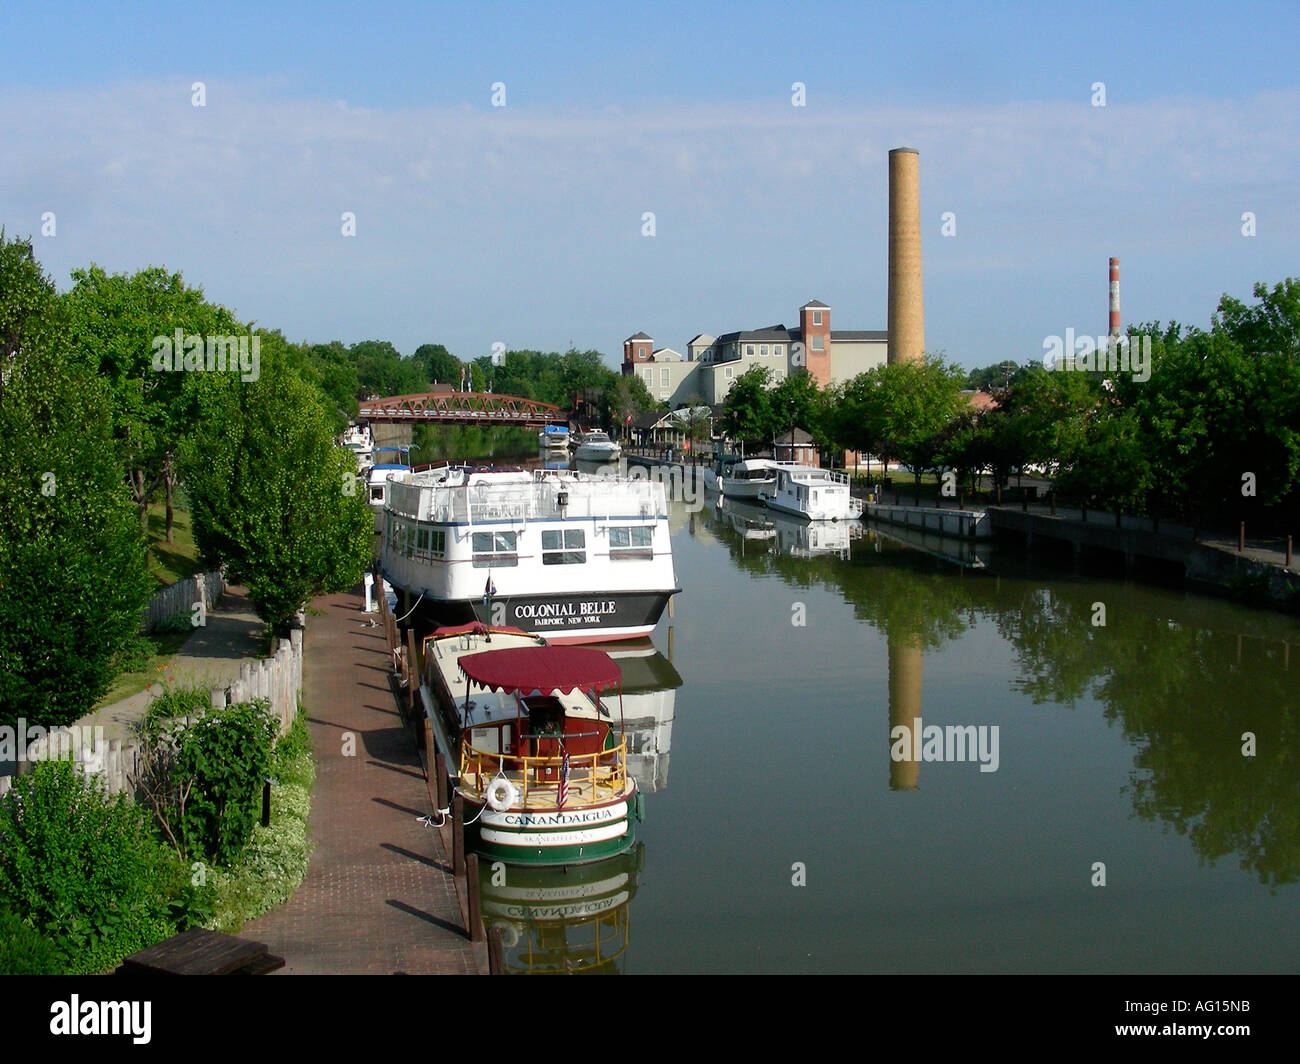 Erie Canal scene, Fairport, NY USA Banque D'Images